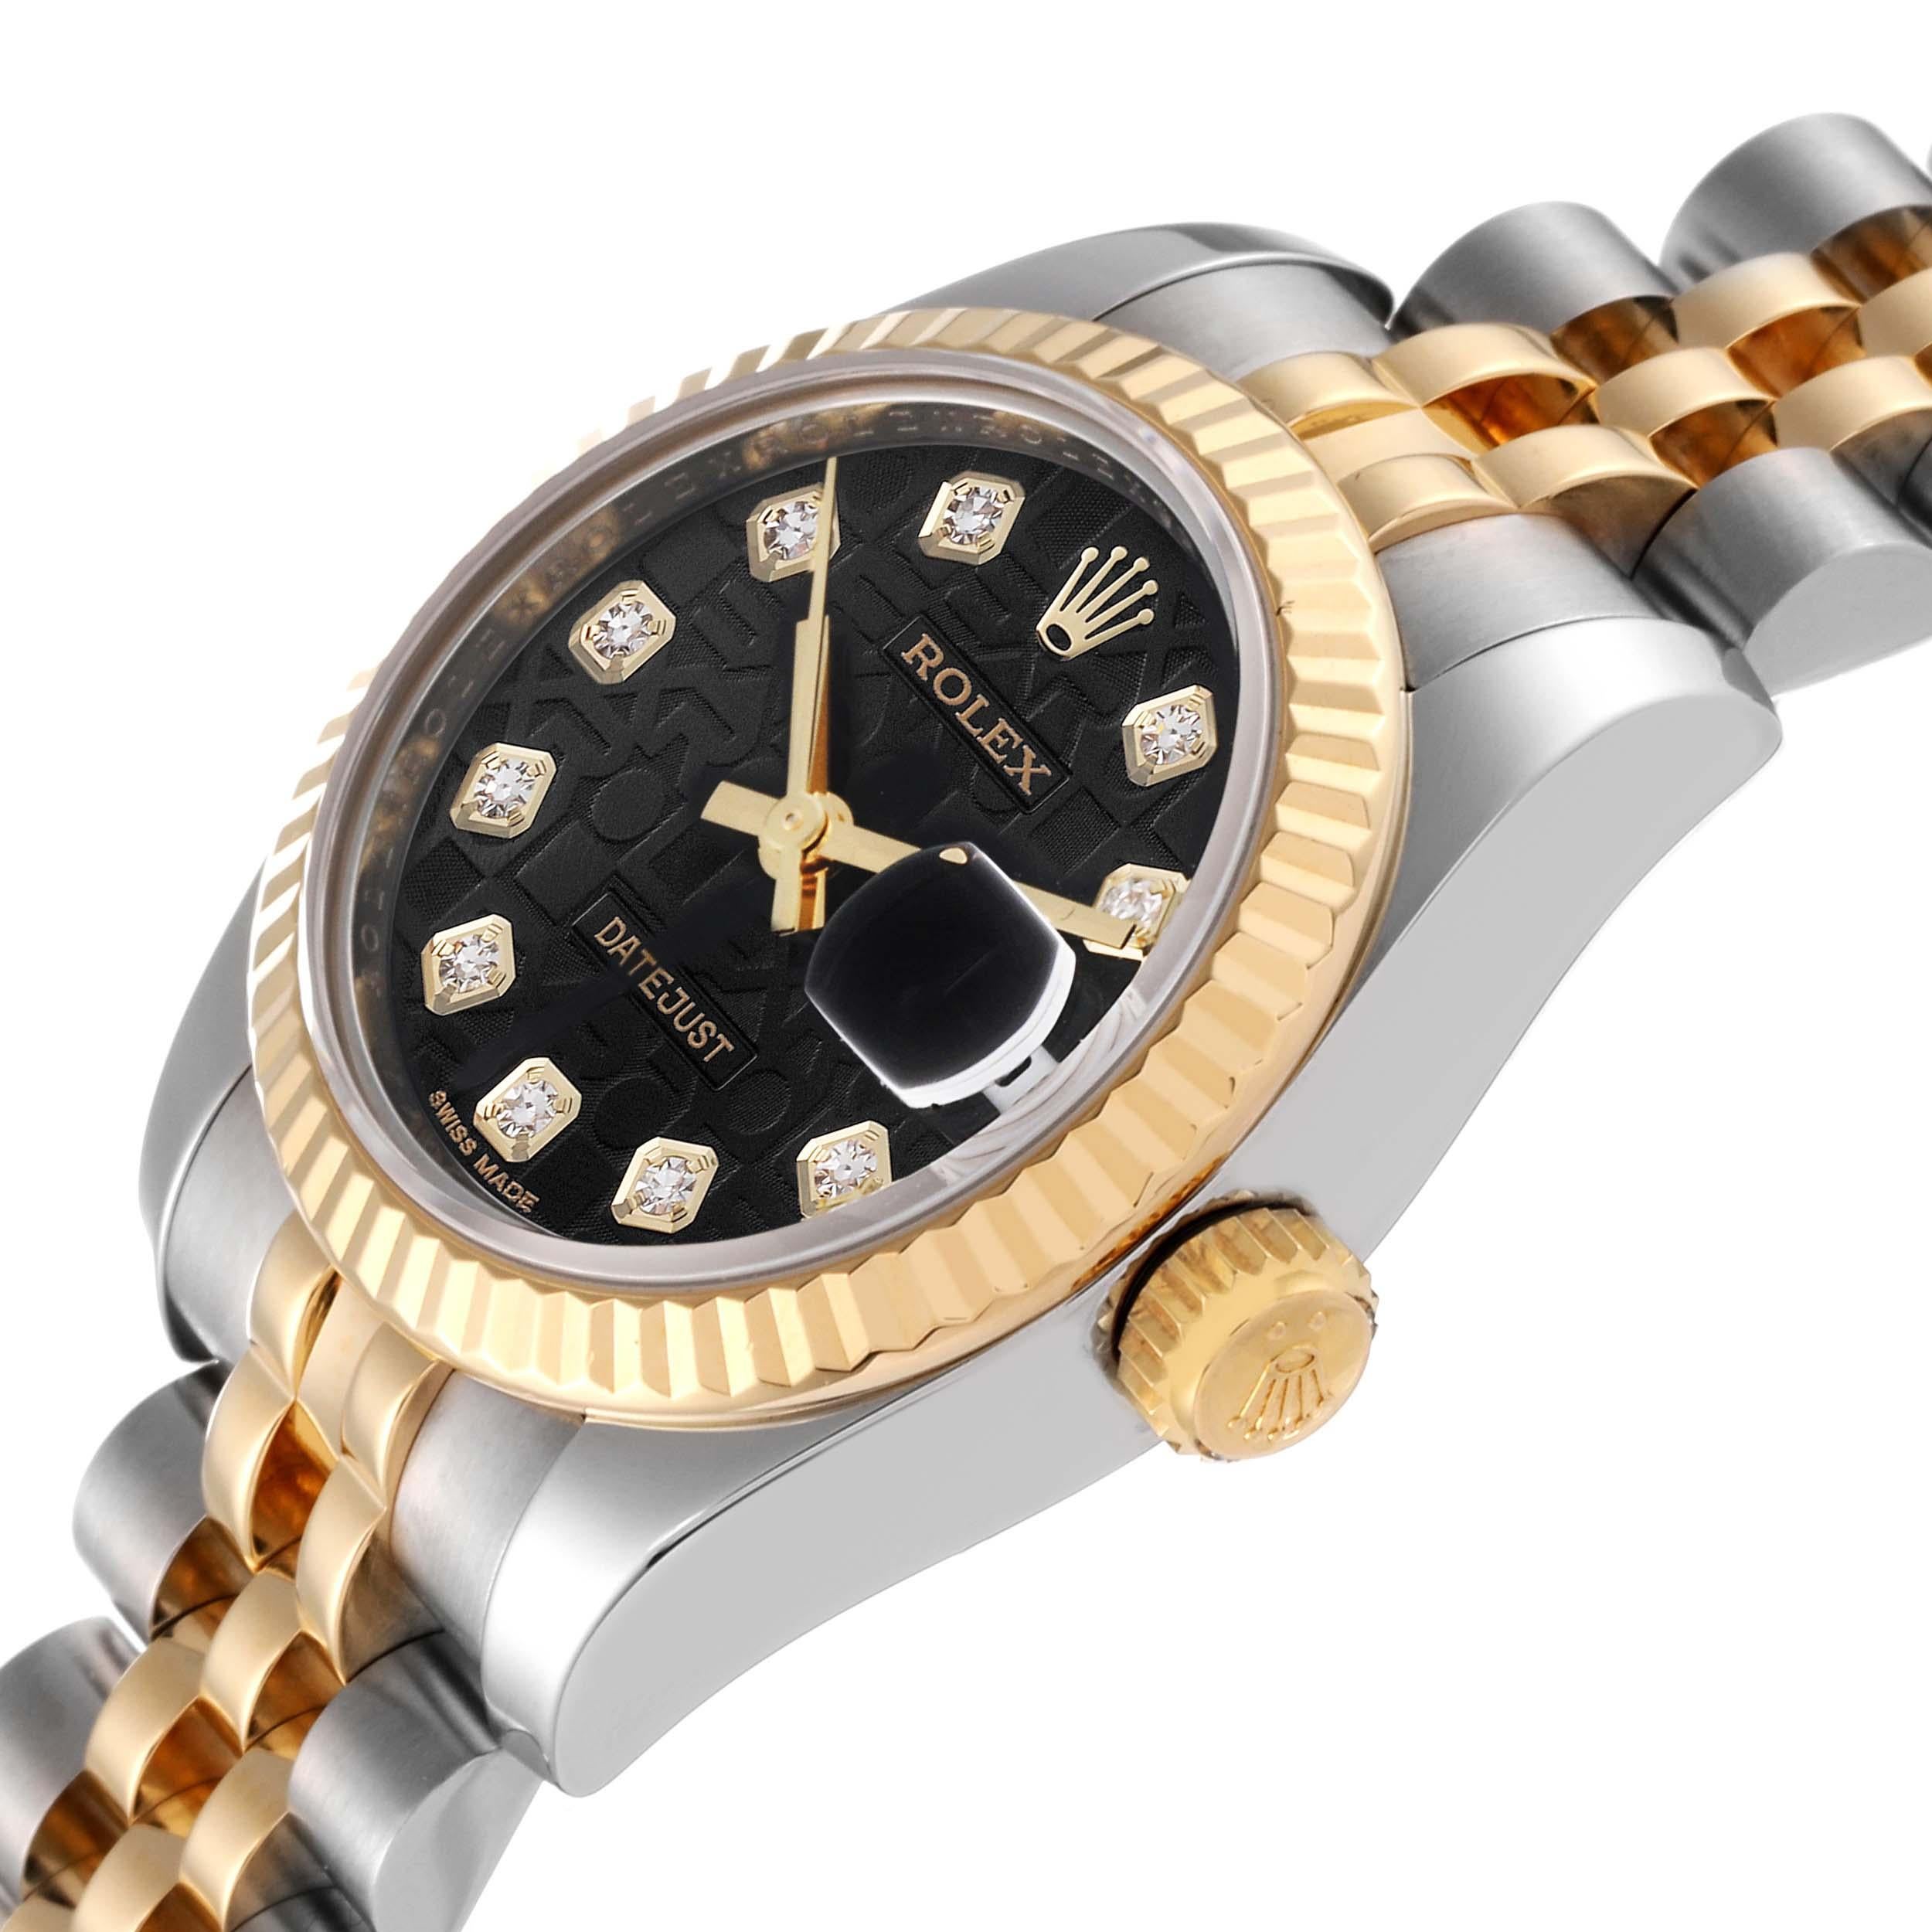 Rolex Datejust Diamond Dial Steel Yellow Gold Ladies Watch 179173 Box Card For Sale 2